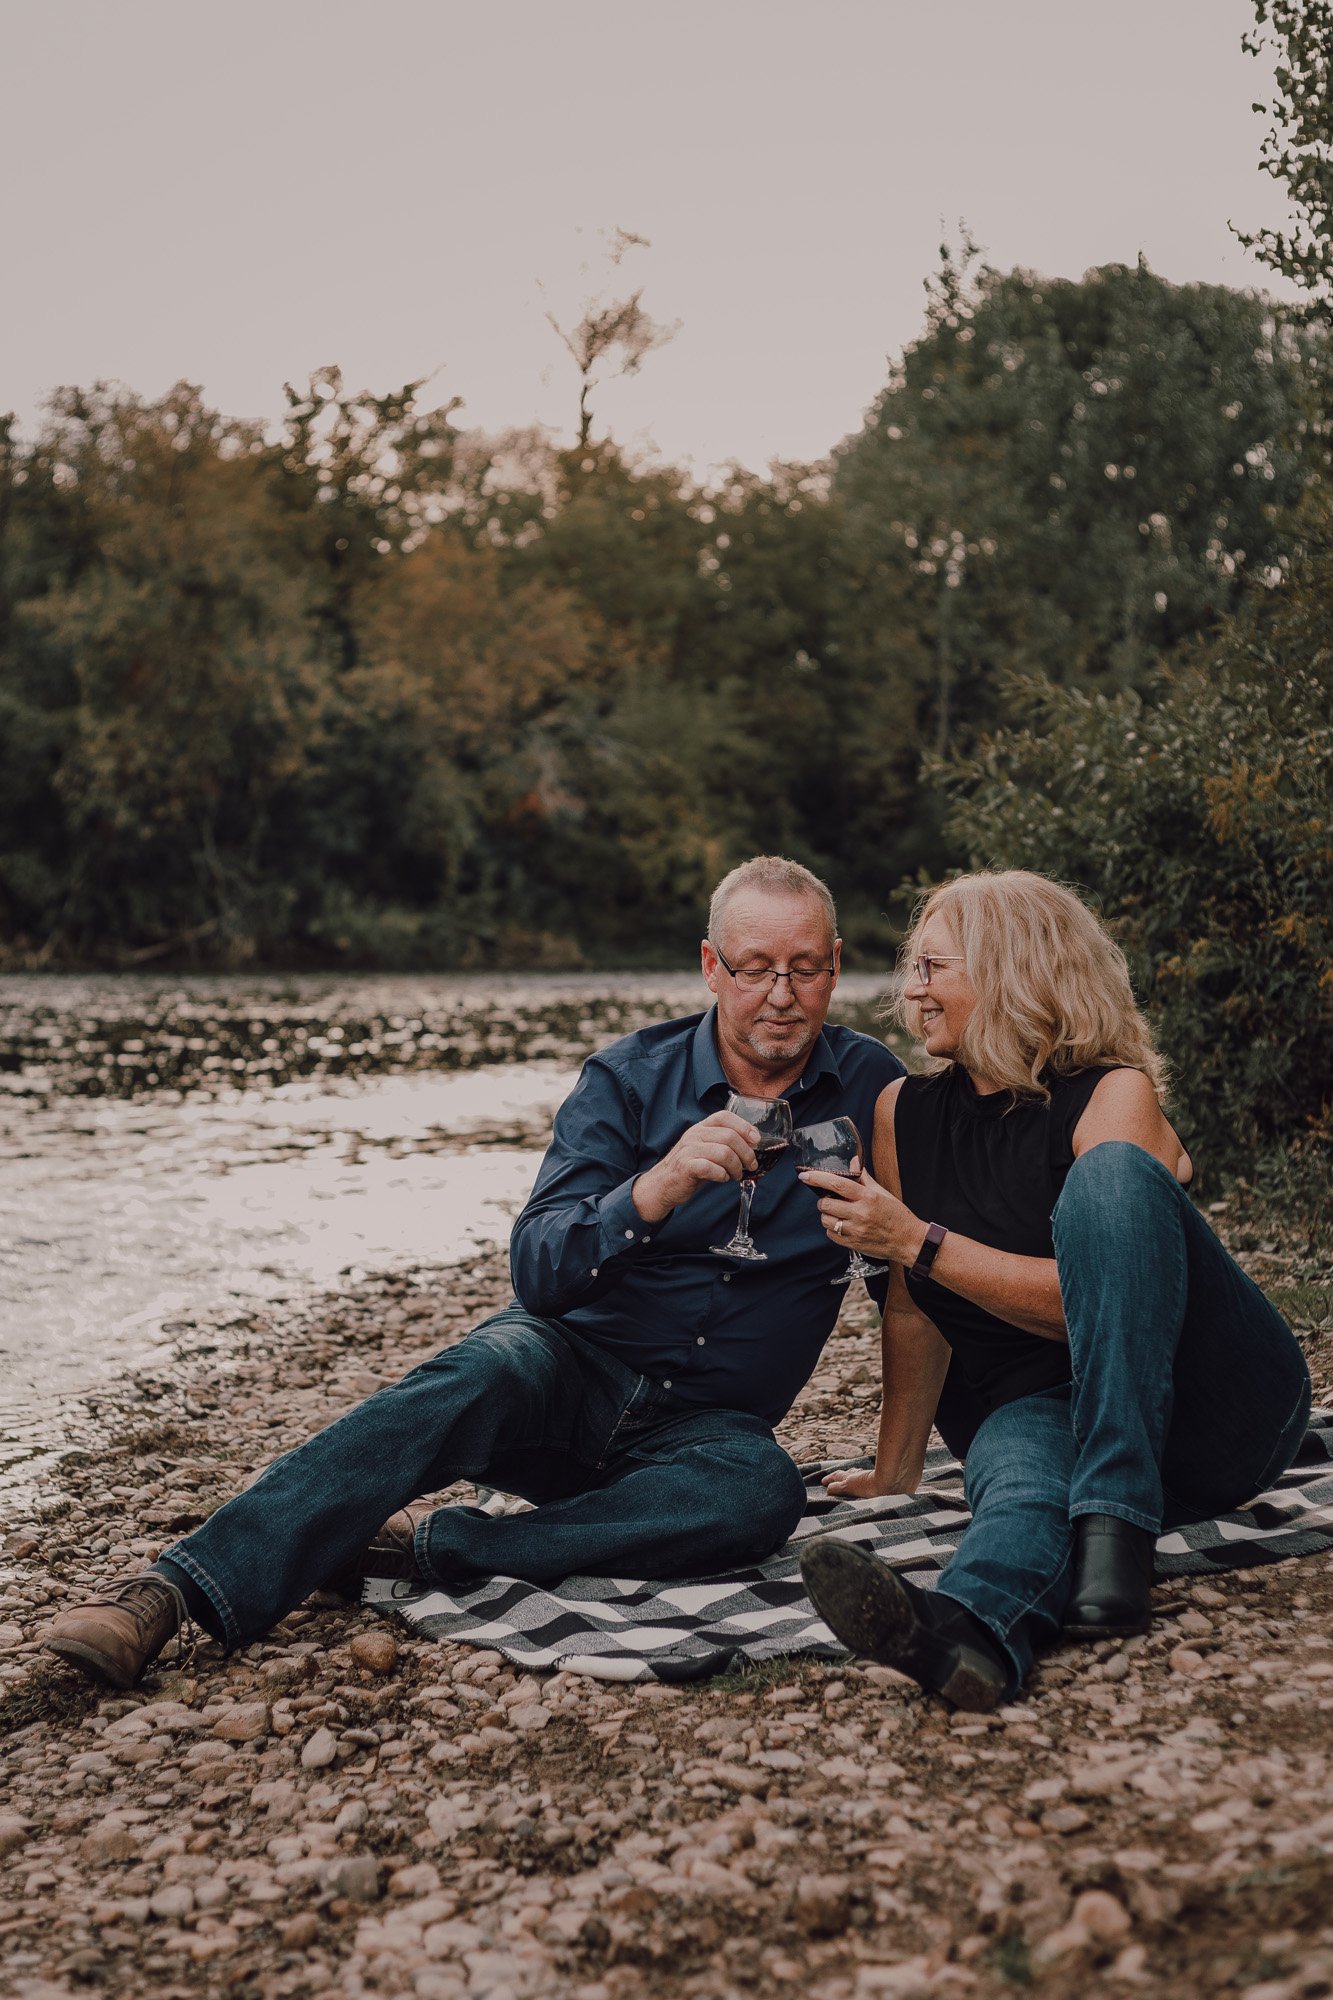 Engagement photography outdoors